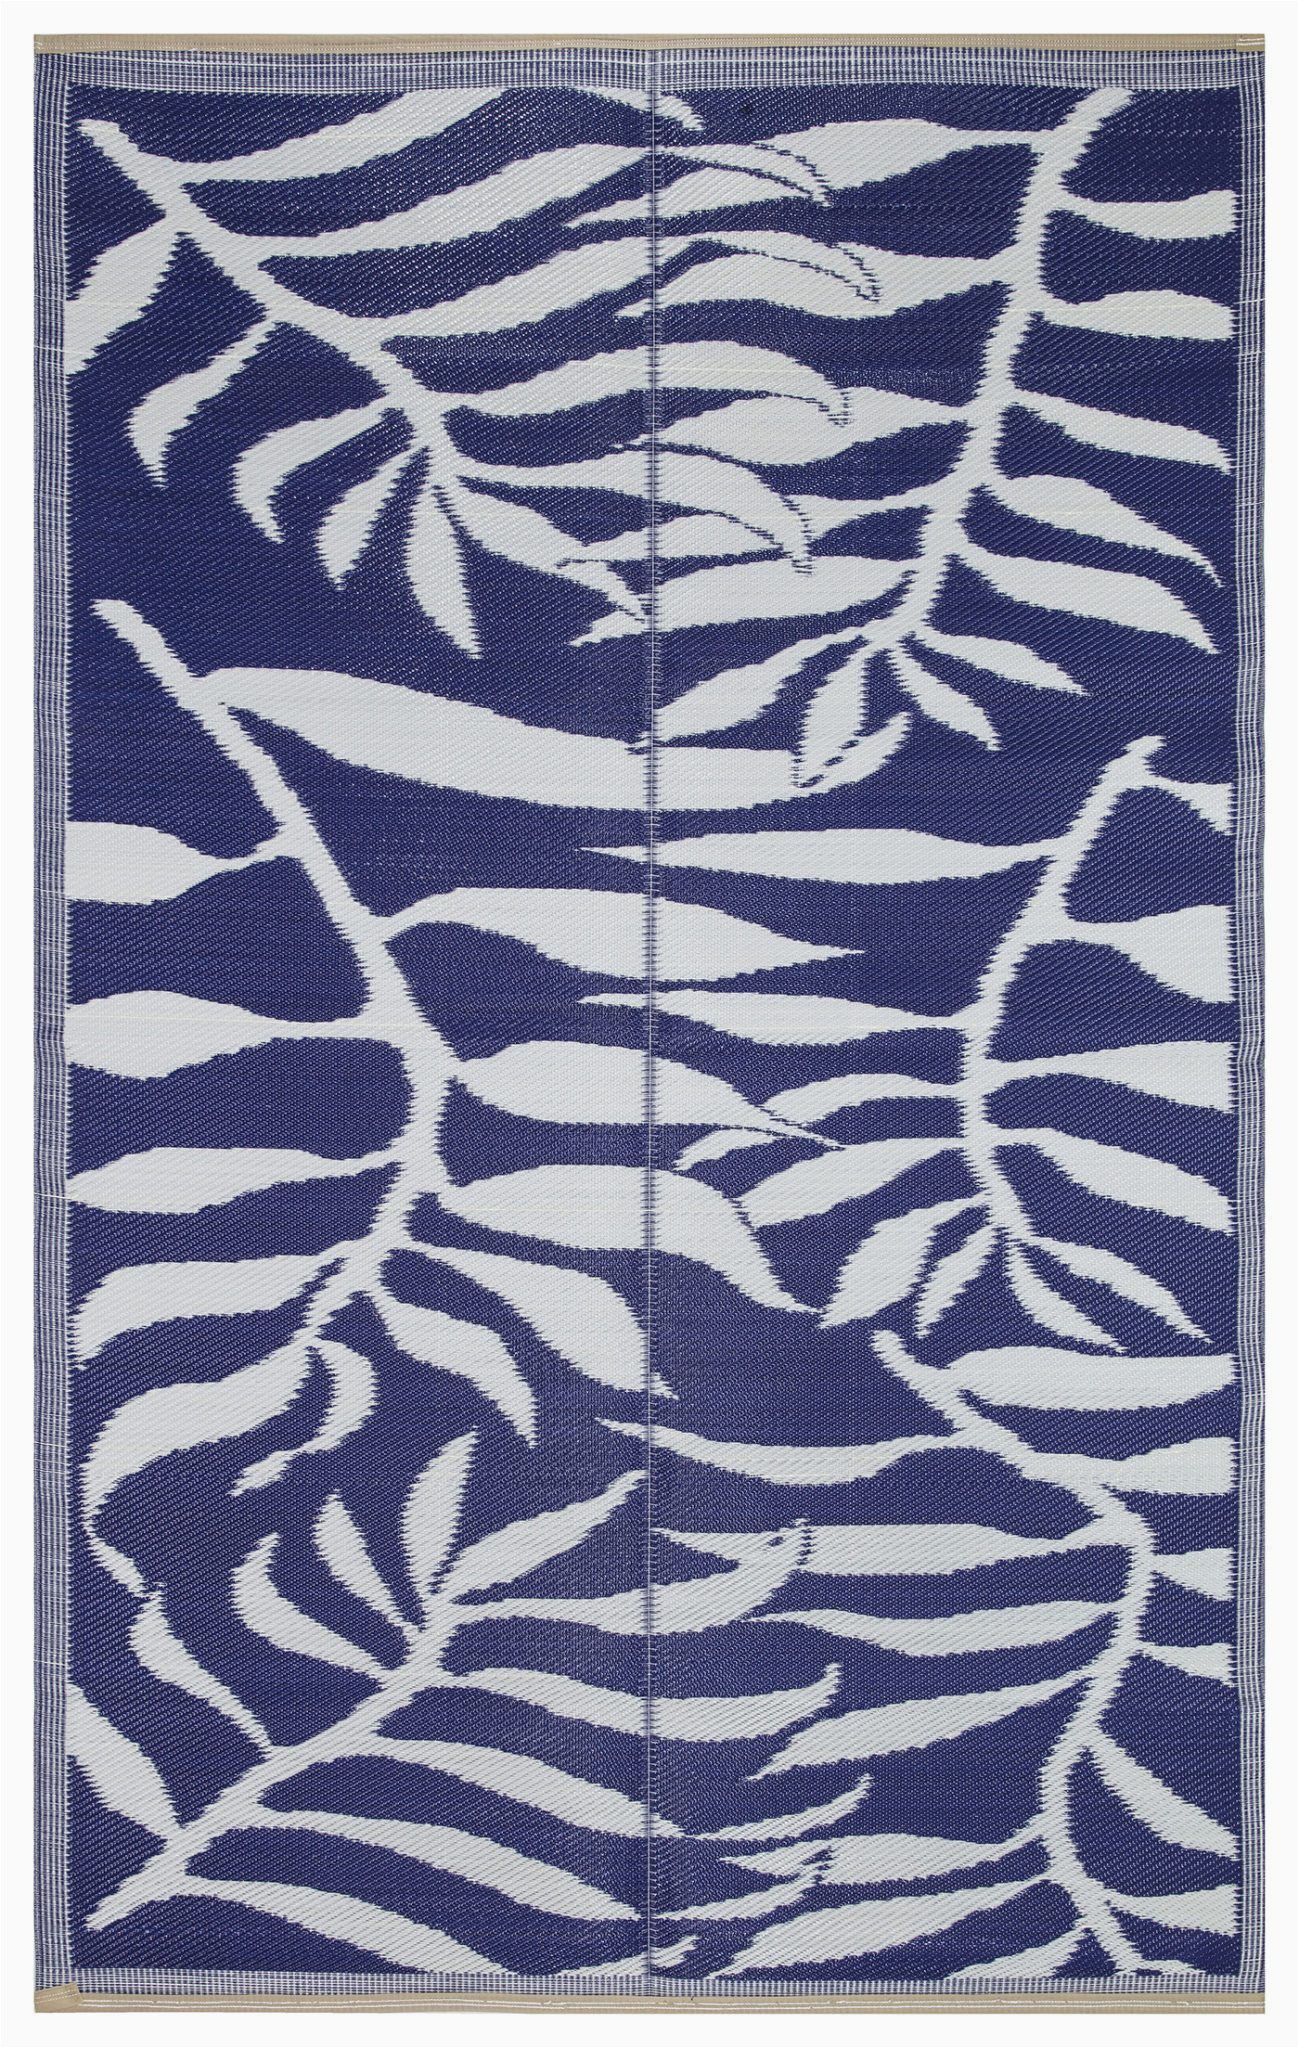 Blue and White Patterned Rug Lightweight Indoor Outdoor Reversible Plastic area Rug Leaf Pattern Blue & White – Beverly Rug